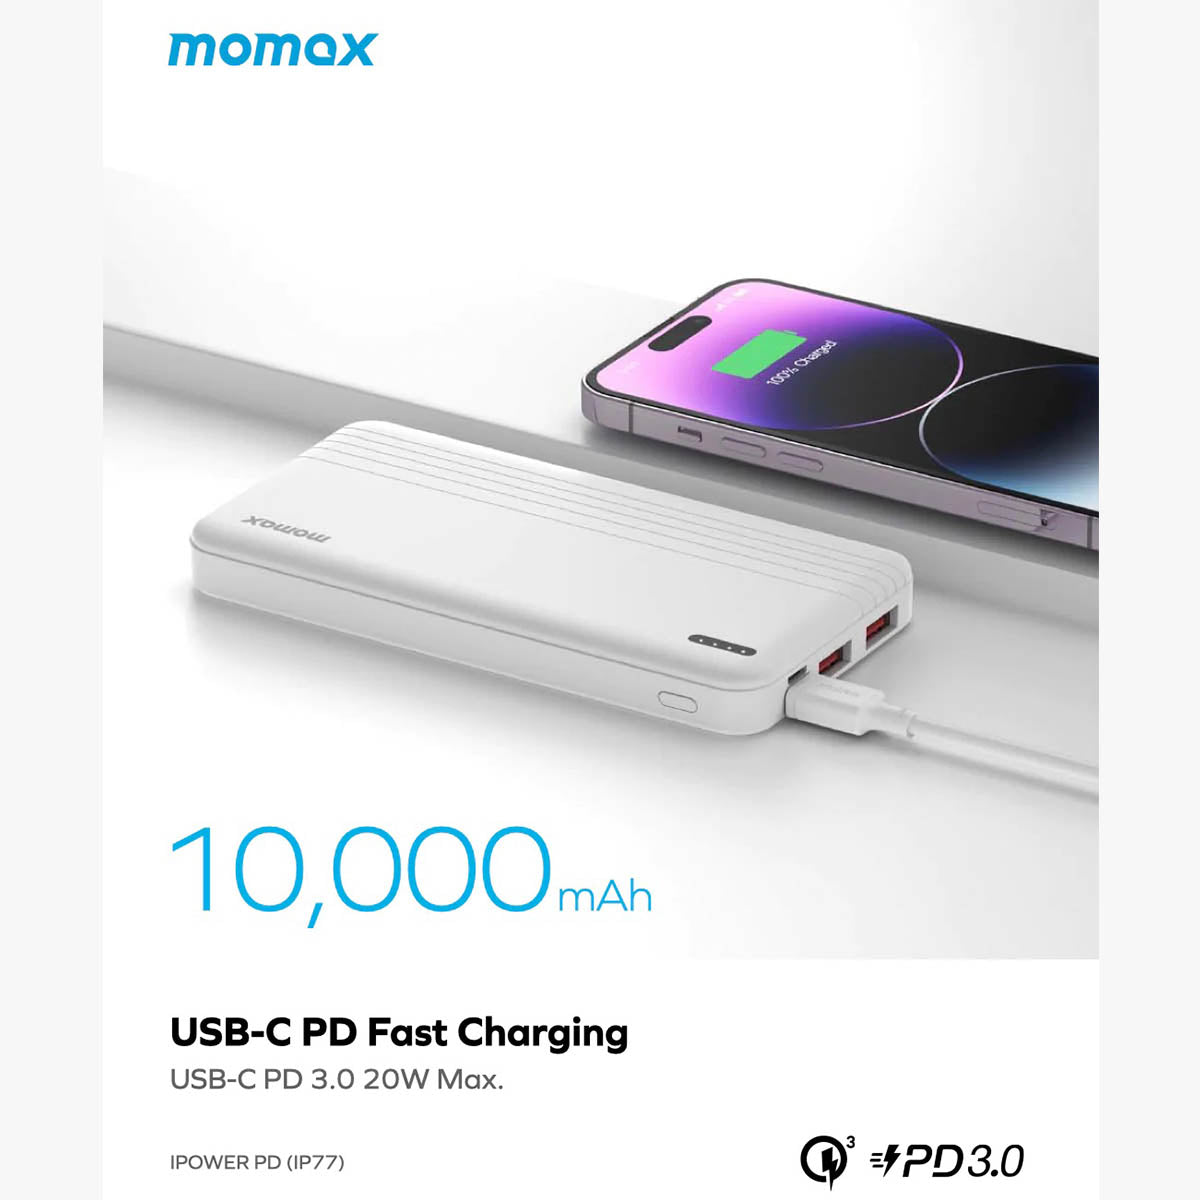 Momax iPower PD Fast Charge Power Bank (10000 mAh)